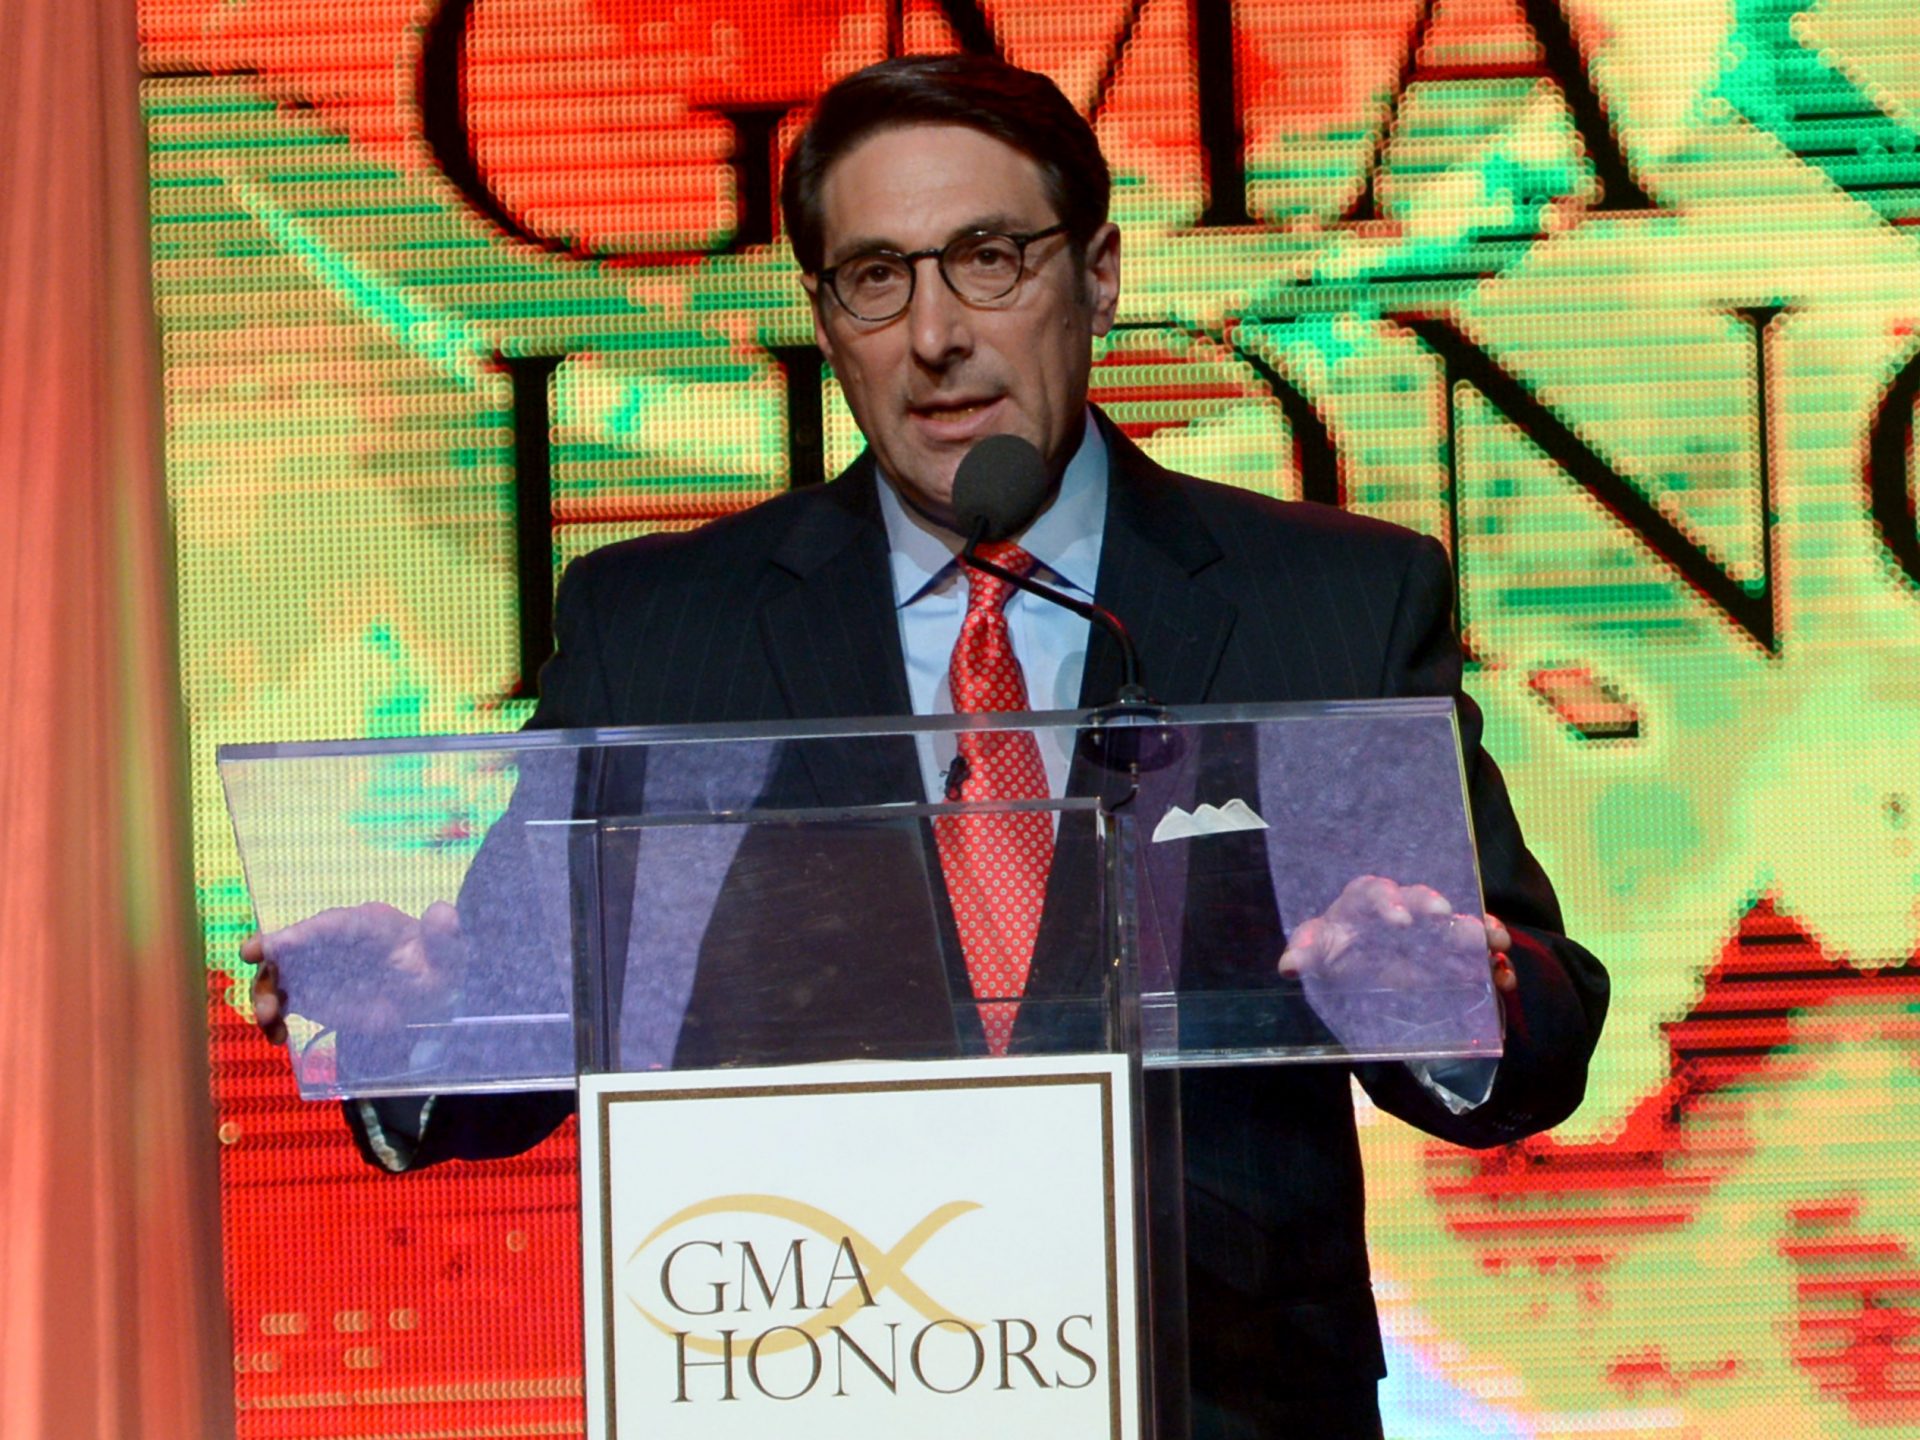 Jay Sekulow represented Trump during the special counsel probe into Russian meddling in the 2016 presidential election campaign.